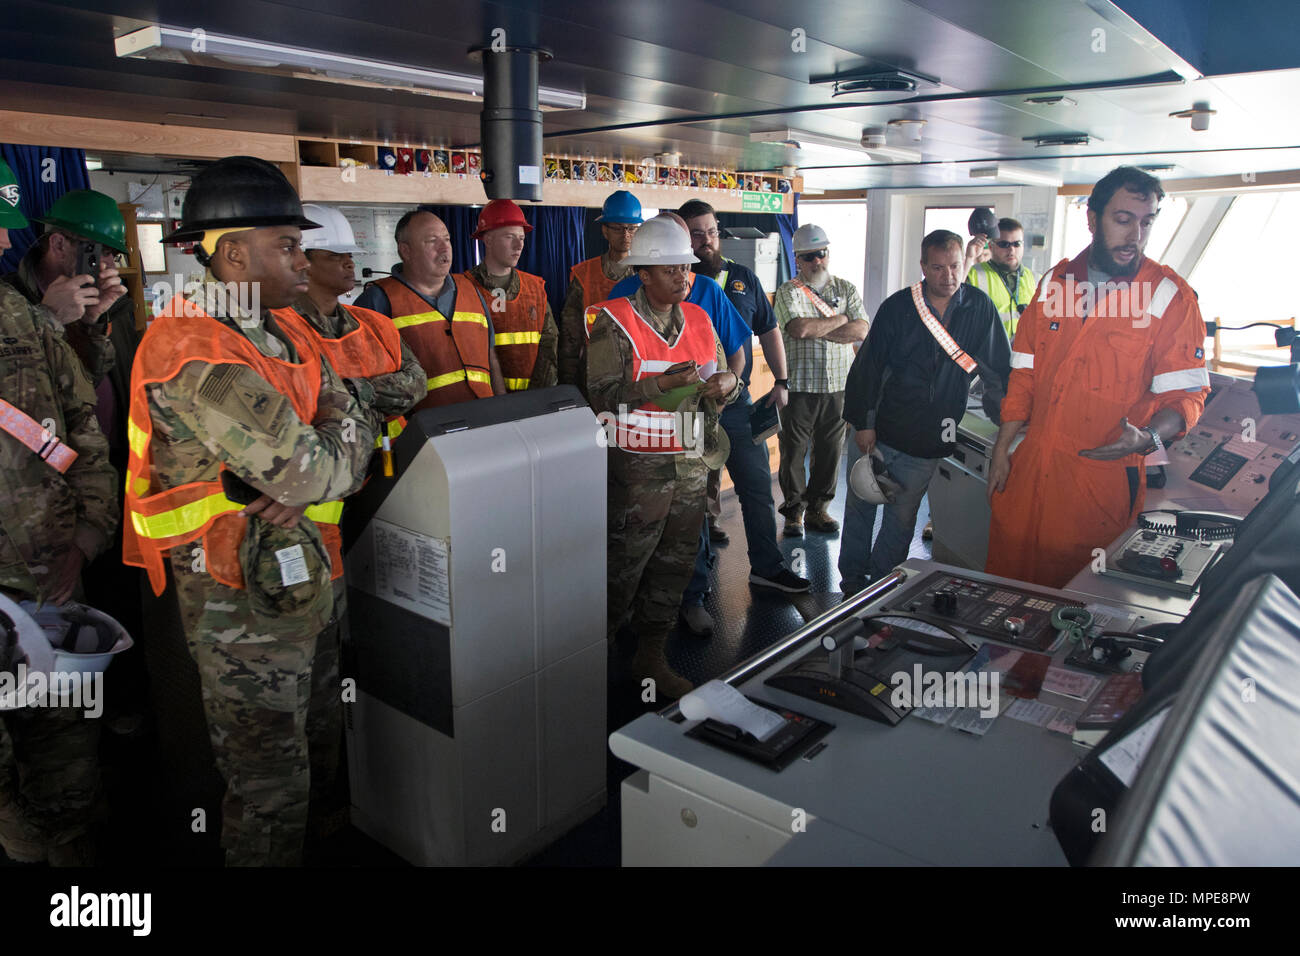 Adler Scott, 3rd Mate of the “Alliance Norfolk” vessel, (right), talks  about safety procedures and vessel capabilities during the 2017 Worldwide  Ammunition Logistics and Explosives Safety Review in Shuaiba Port, Kuwait,  on